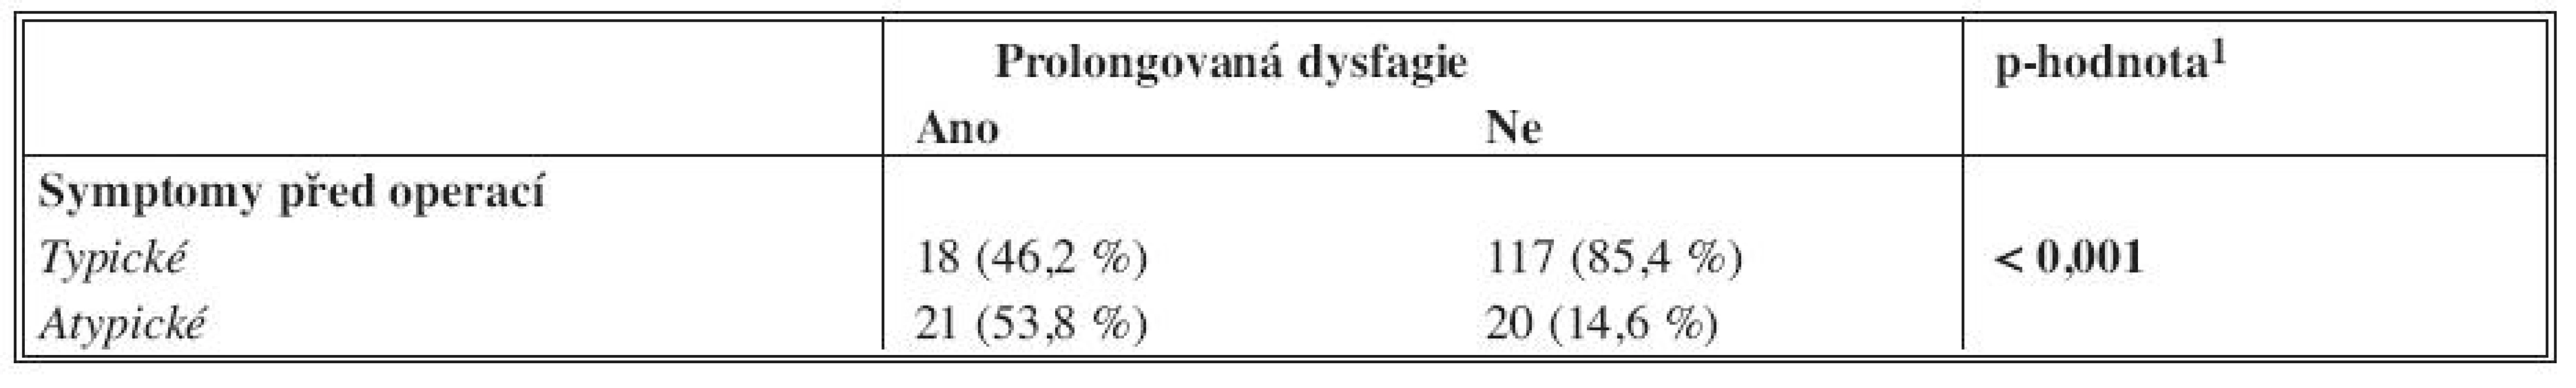 Typologie pacientů podle protrahované dysfagie
Tab. 2. Typology of patients in correlation to protracted dysphagia